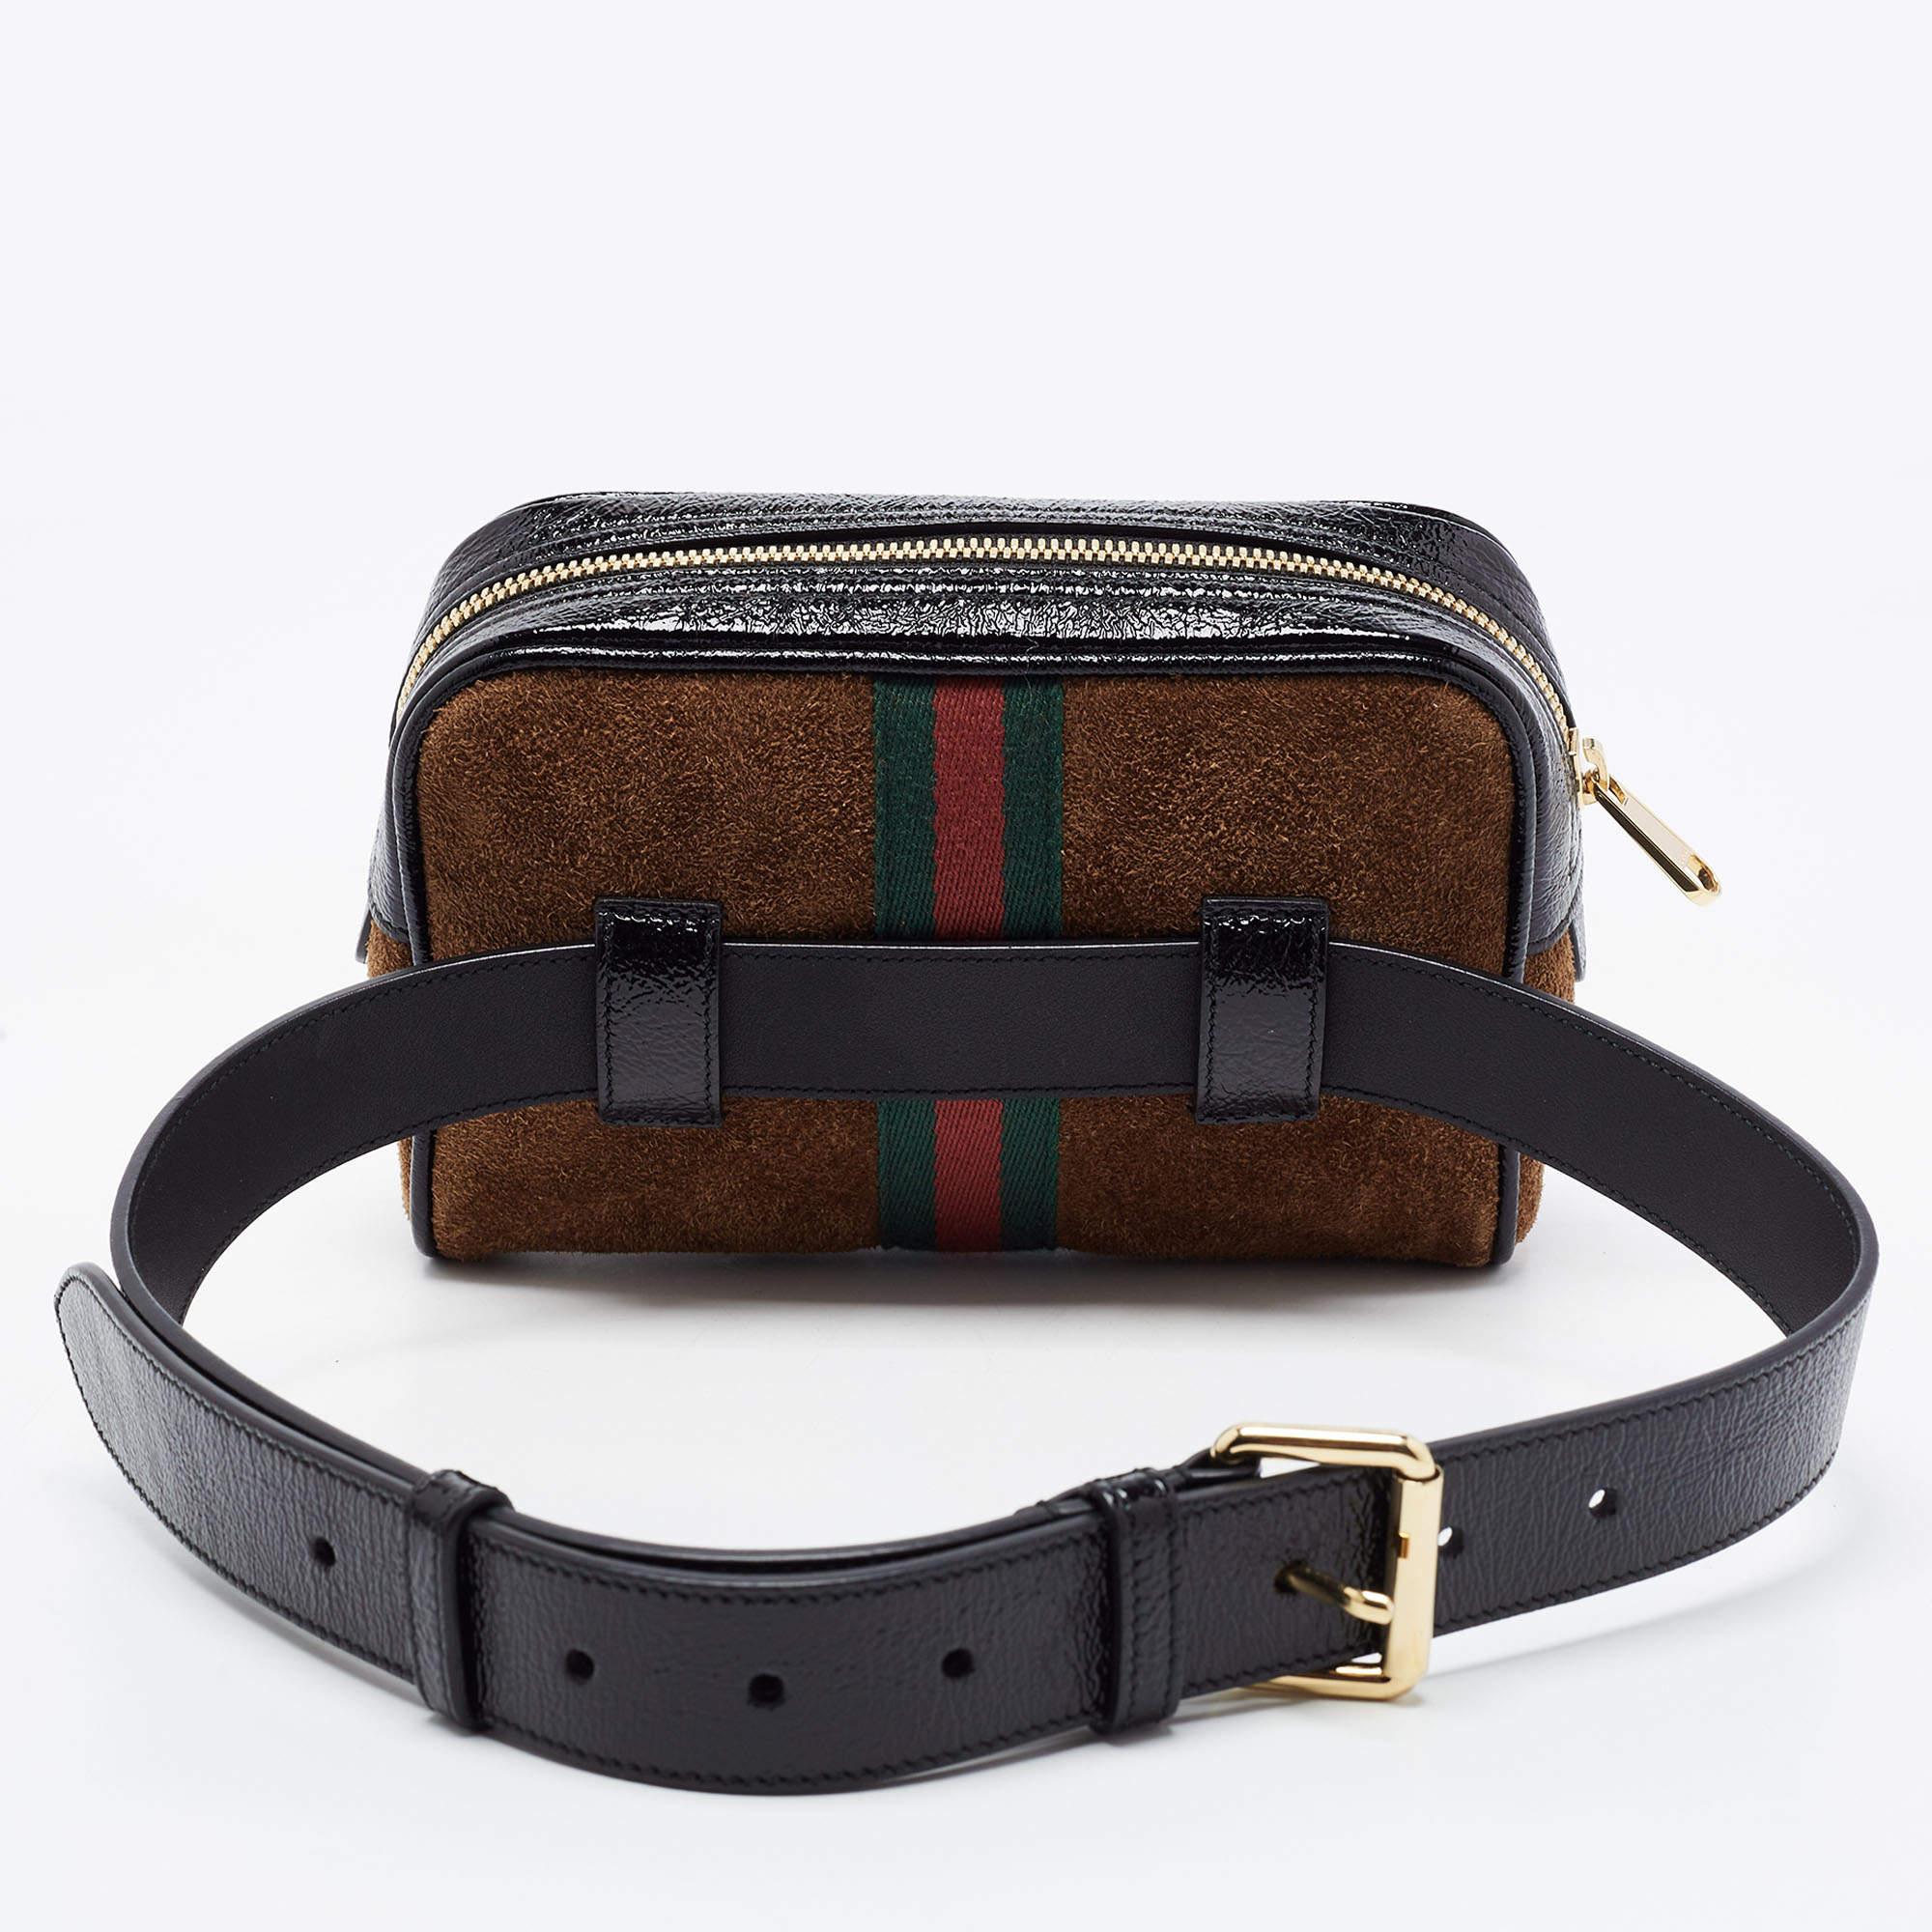 Add class to your look by accessorizing with this Gucci belt bag. Designed expertly, this creation features a suede body enhanced with patent leather trims. The bag flaunts signature GG on the front, along with the Web detailing. It is complete with